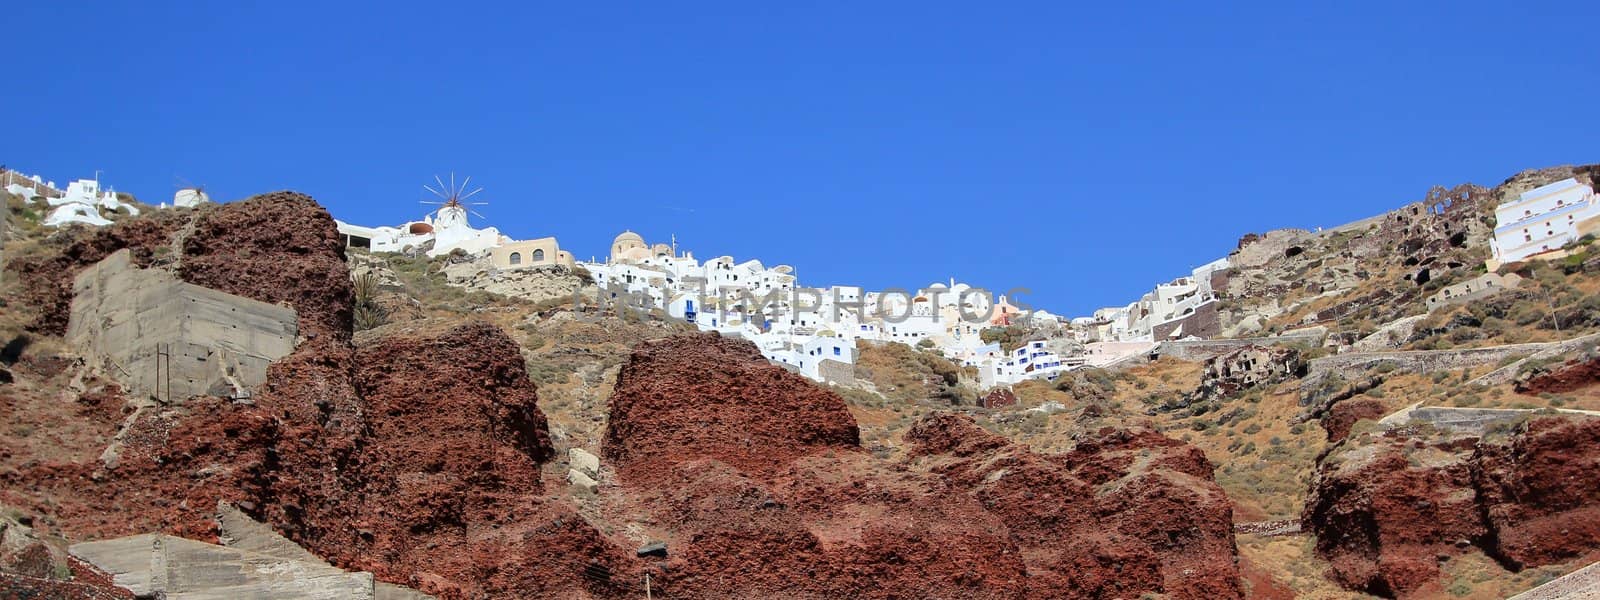 Panoramic view of Oia village on the cliff at Santorini, Greece